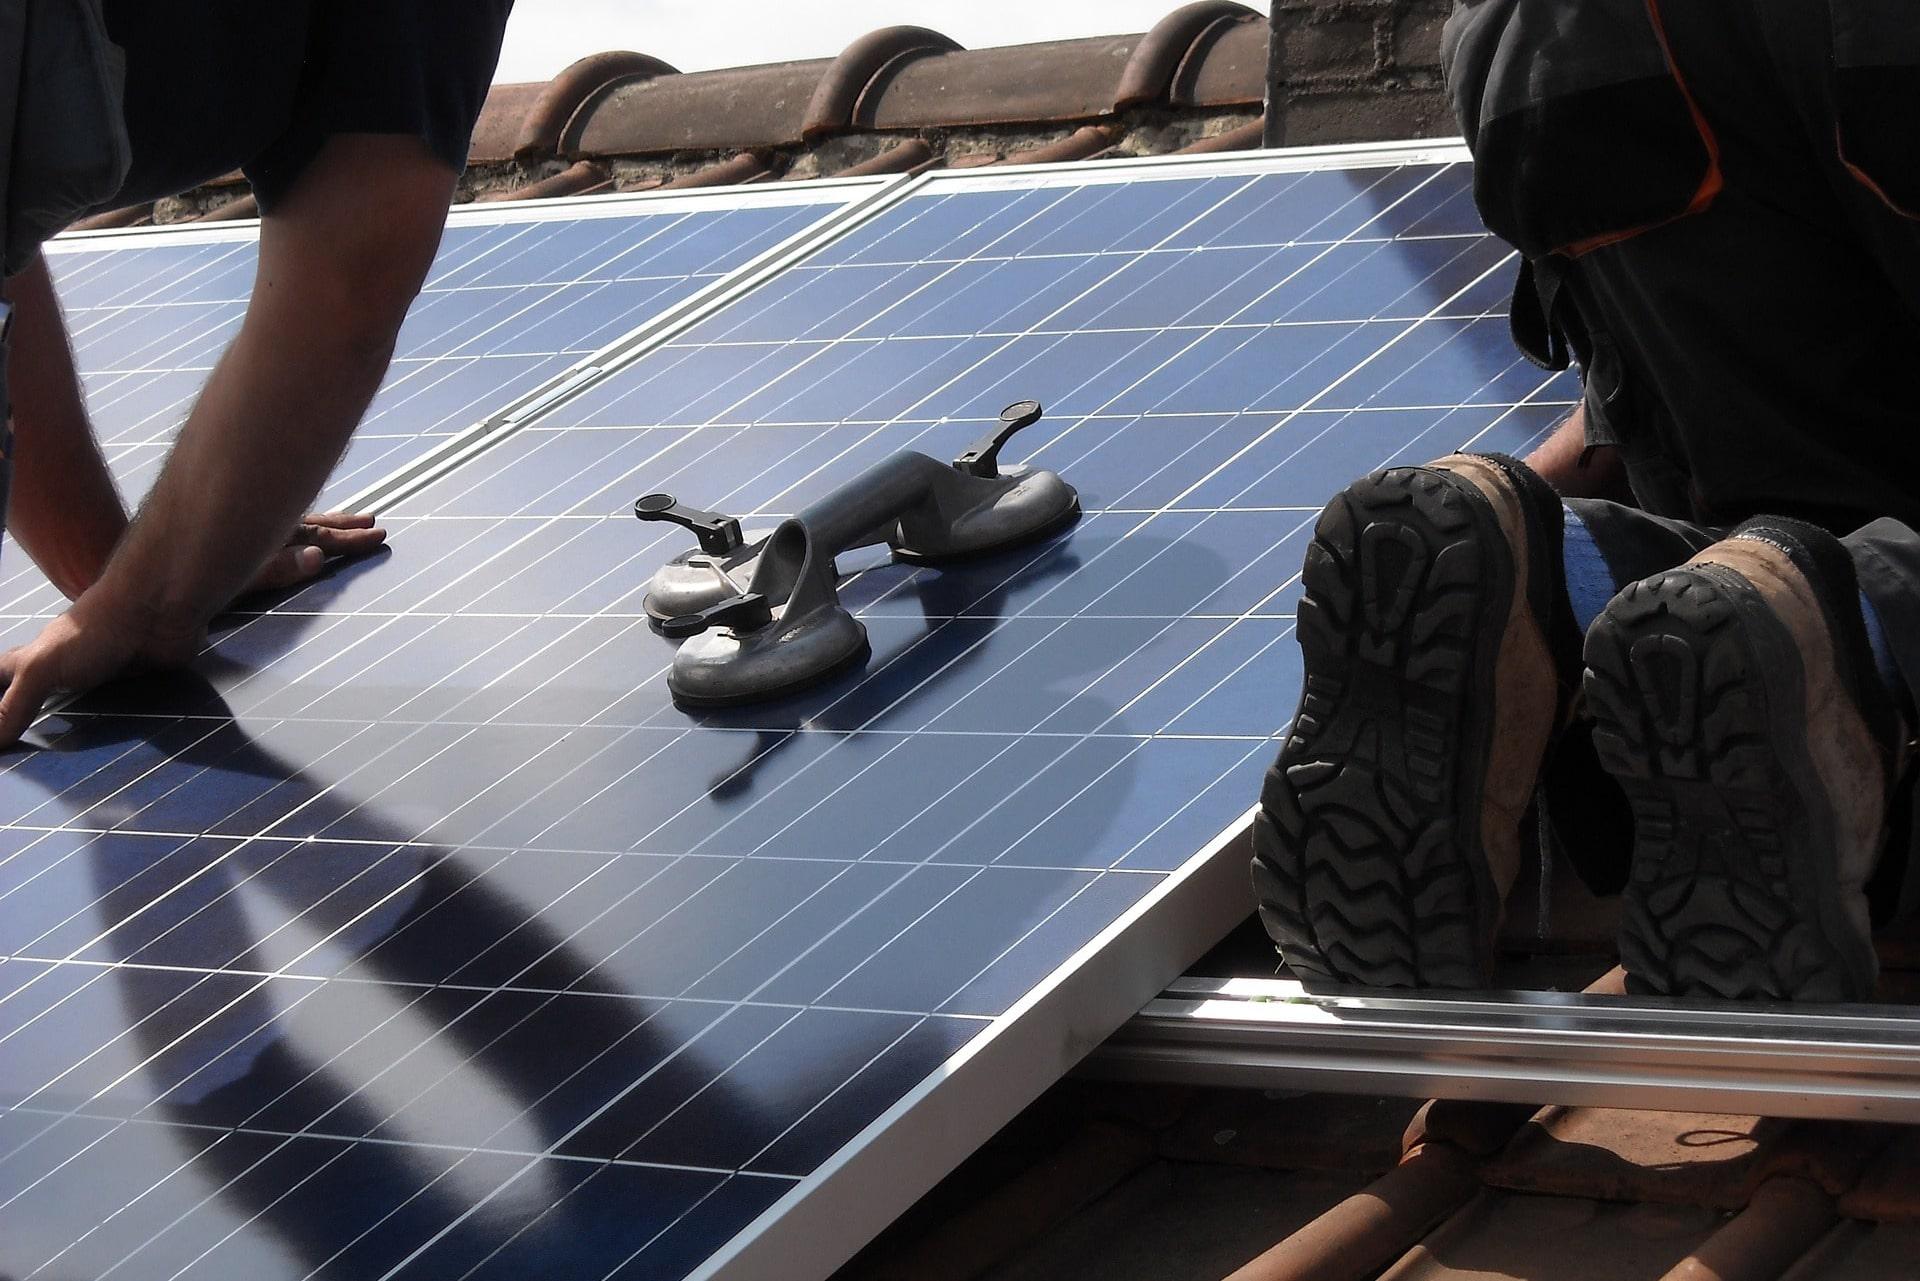 Installation of the rooftop PV system for MUST is done and handed